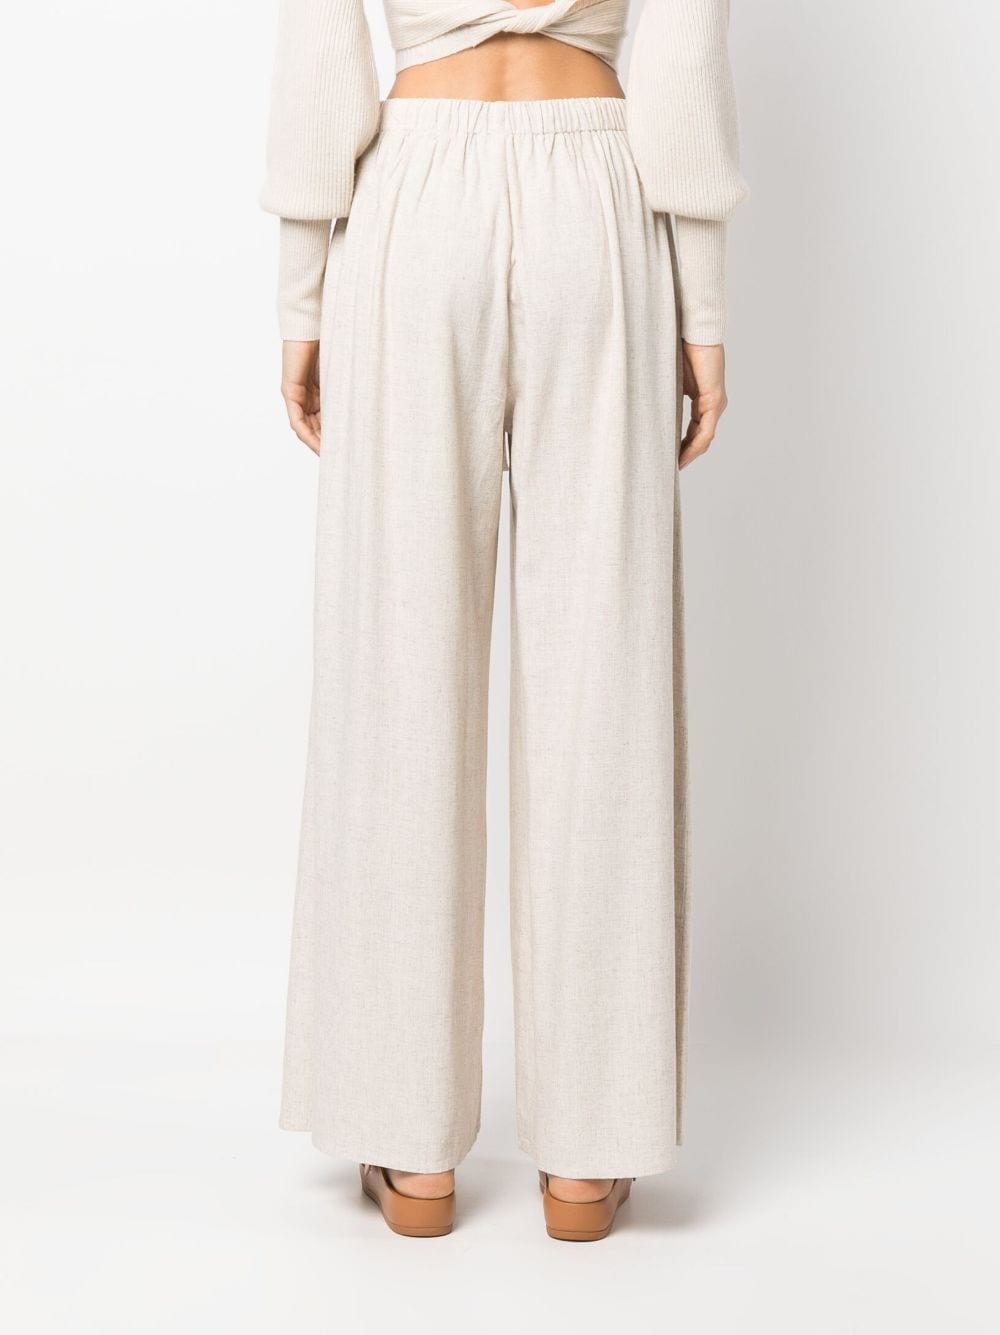 Pisca high-waisted palazzo pants - 4